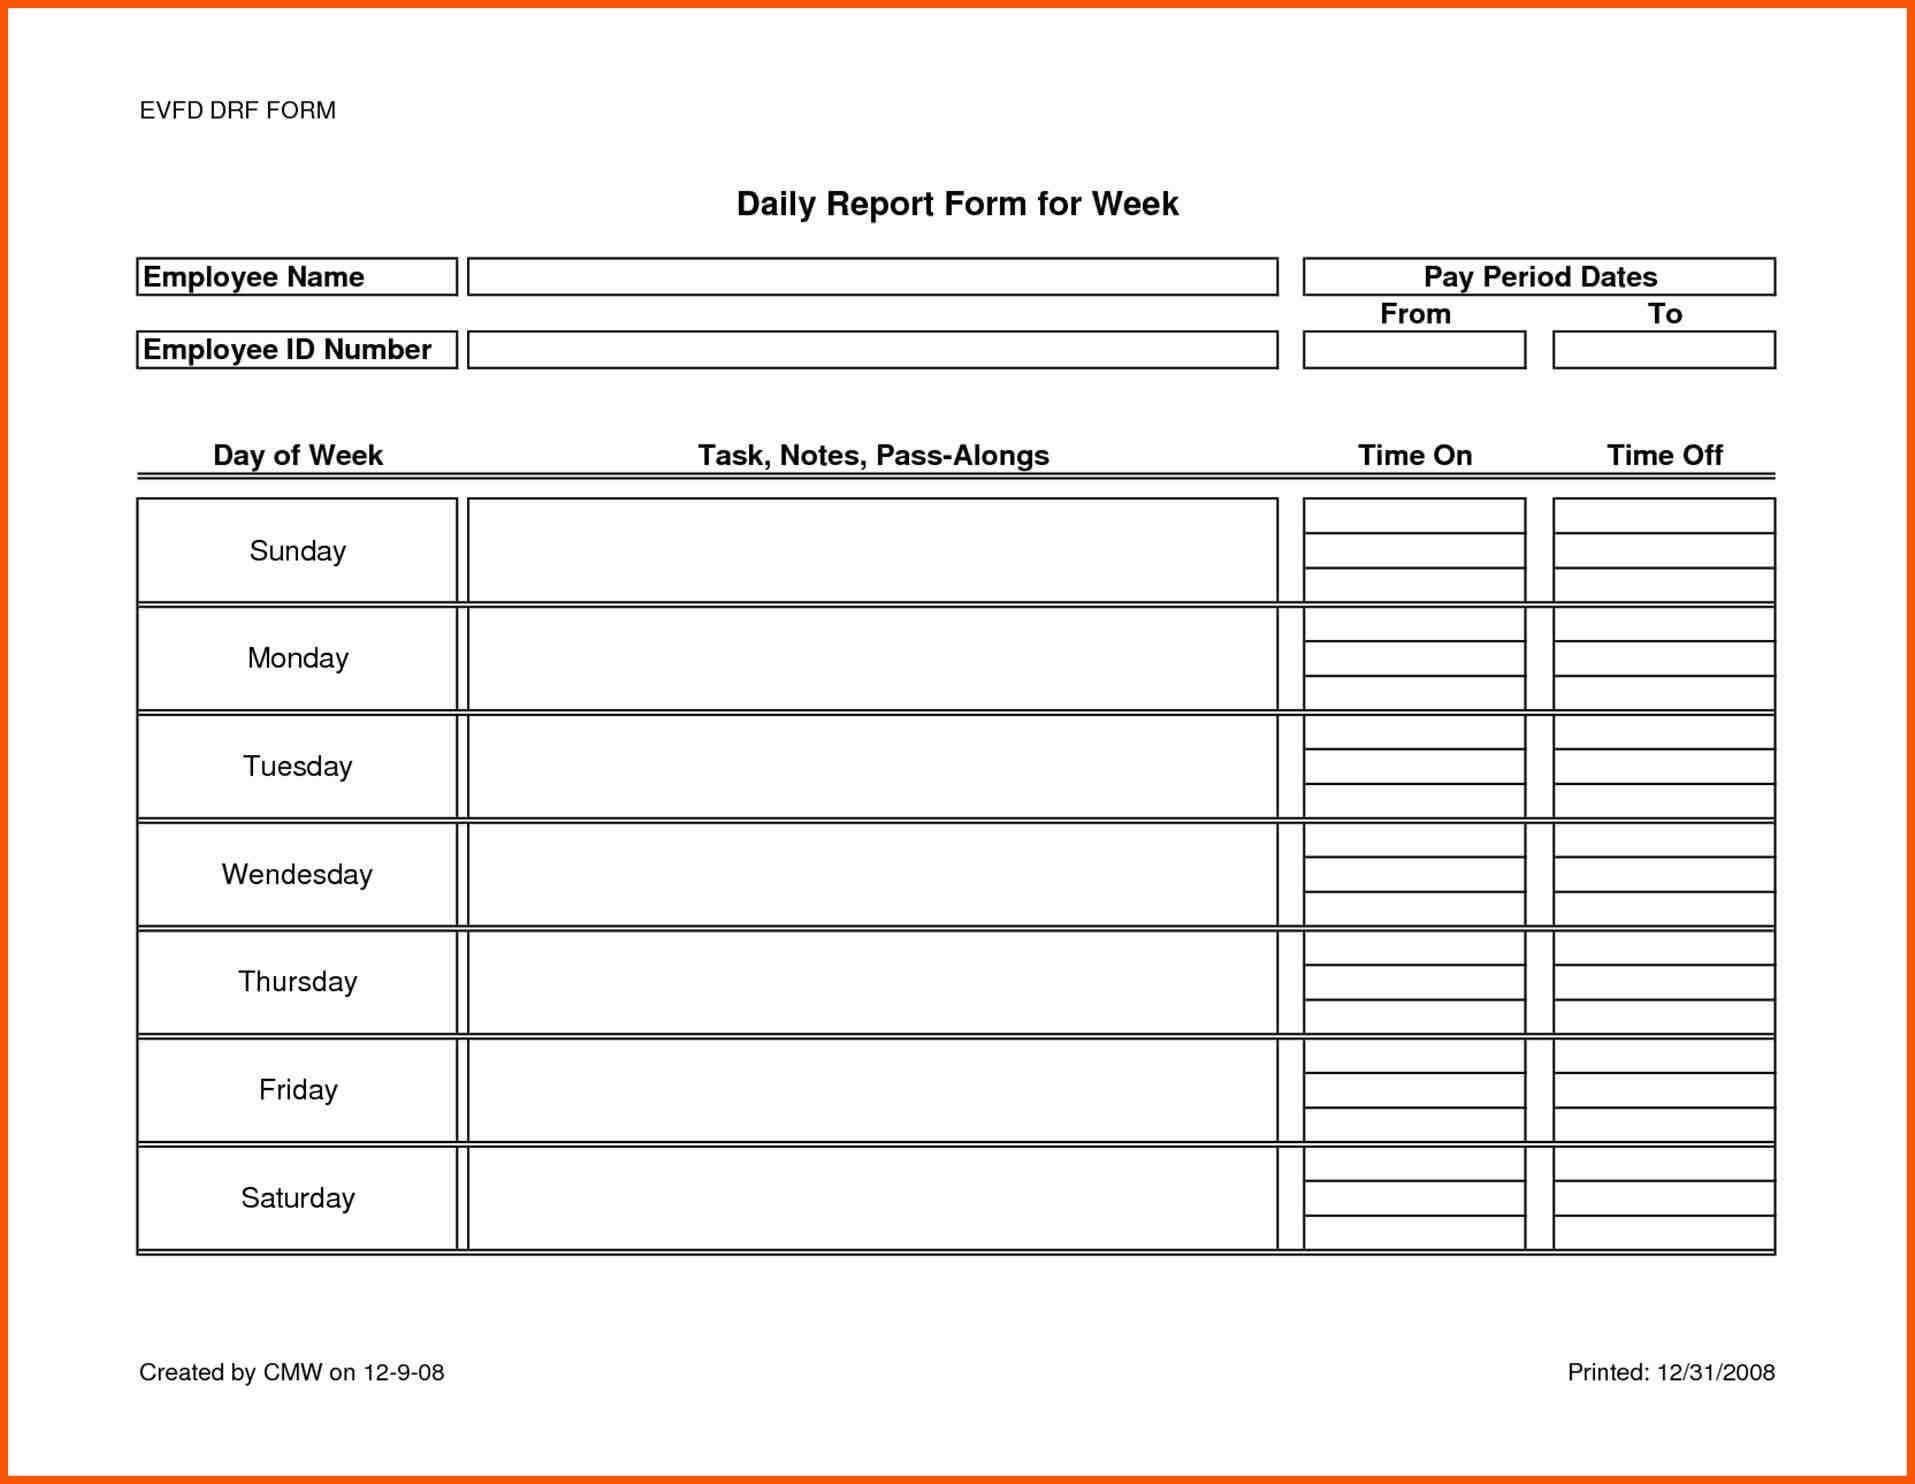 010 Daily Work Report Format Sample In Excel Job January With Regard To Daily Work Report Template